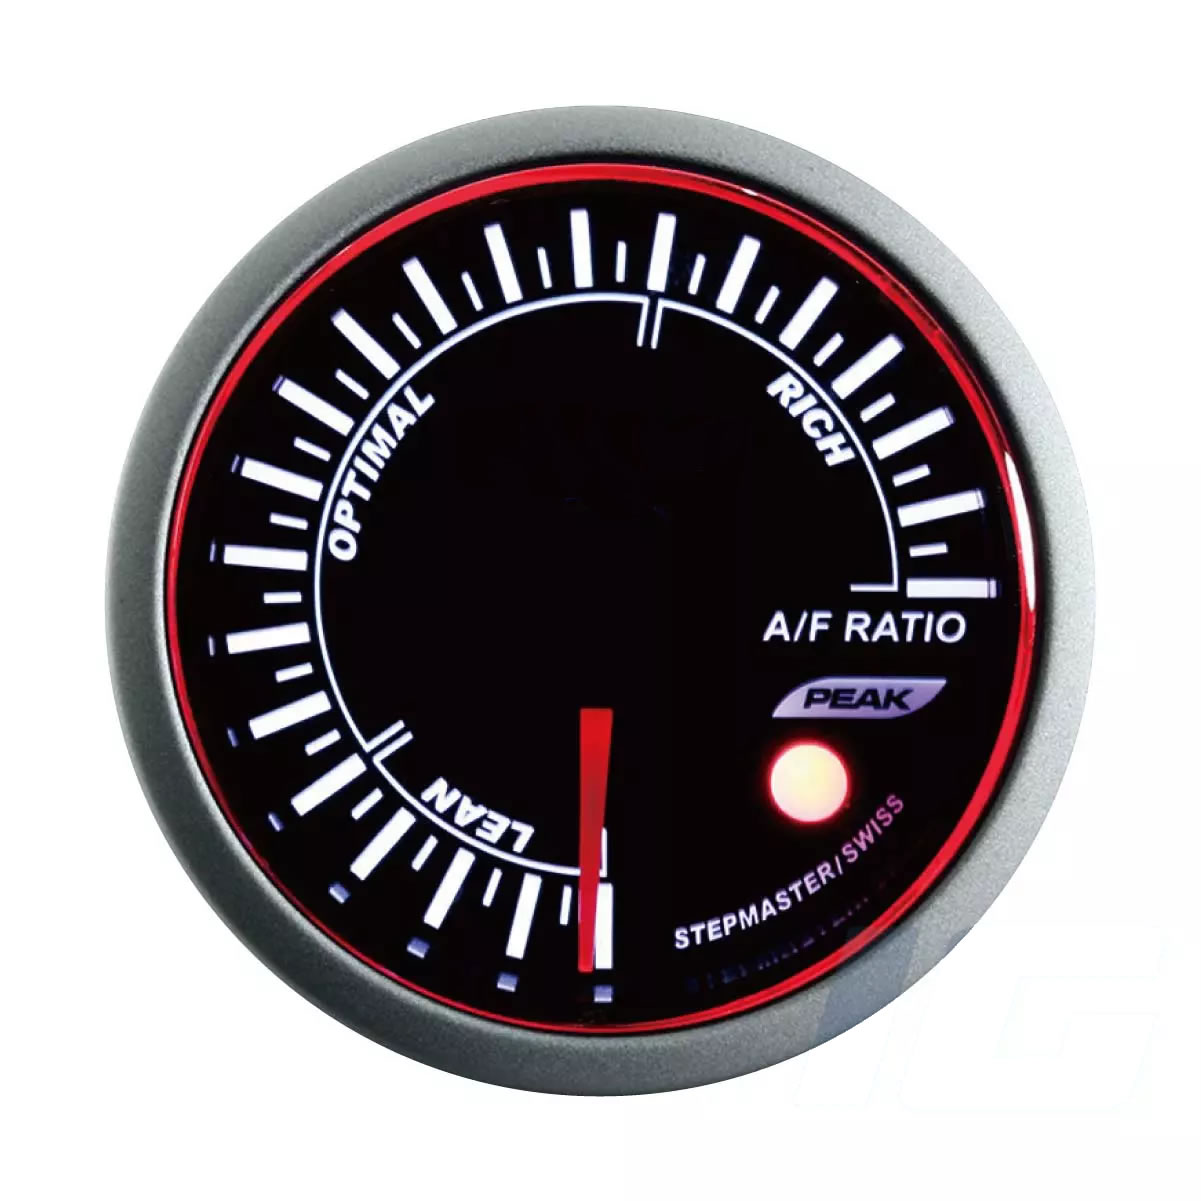 52mm White and Blue and Amber LED Performance Car Gauges - Air or Fuel Ratio Gauge With Warning and Peak For Your Sport Racing Car